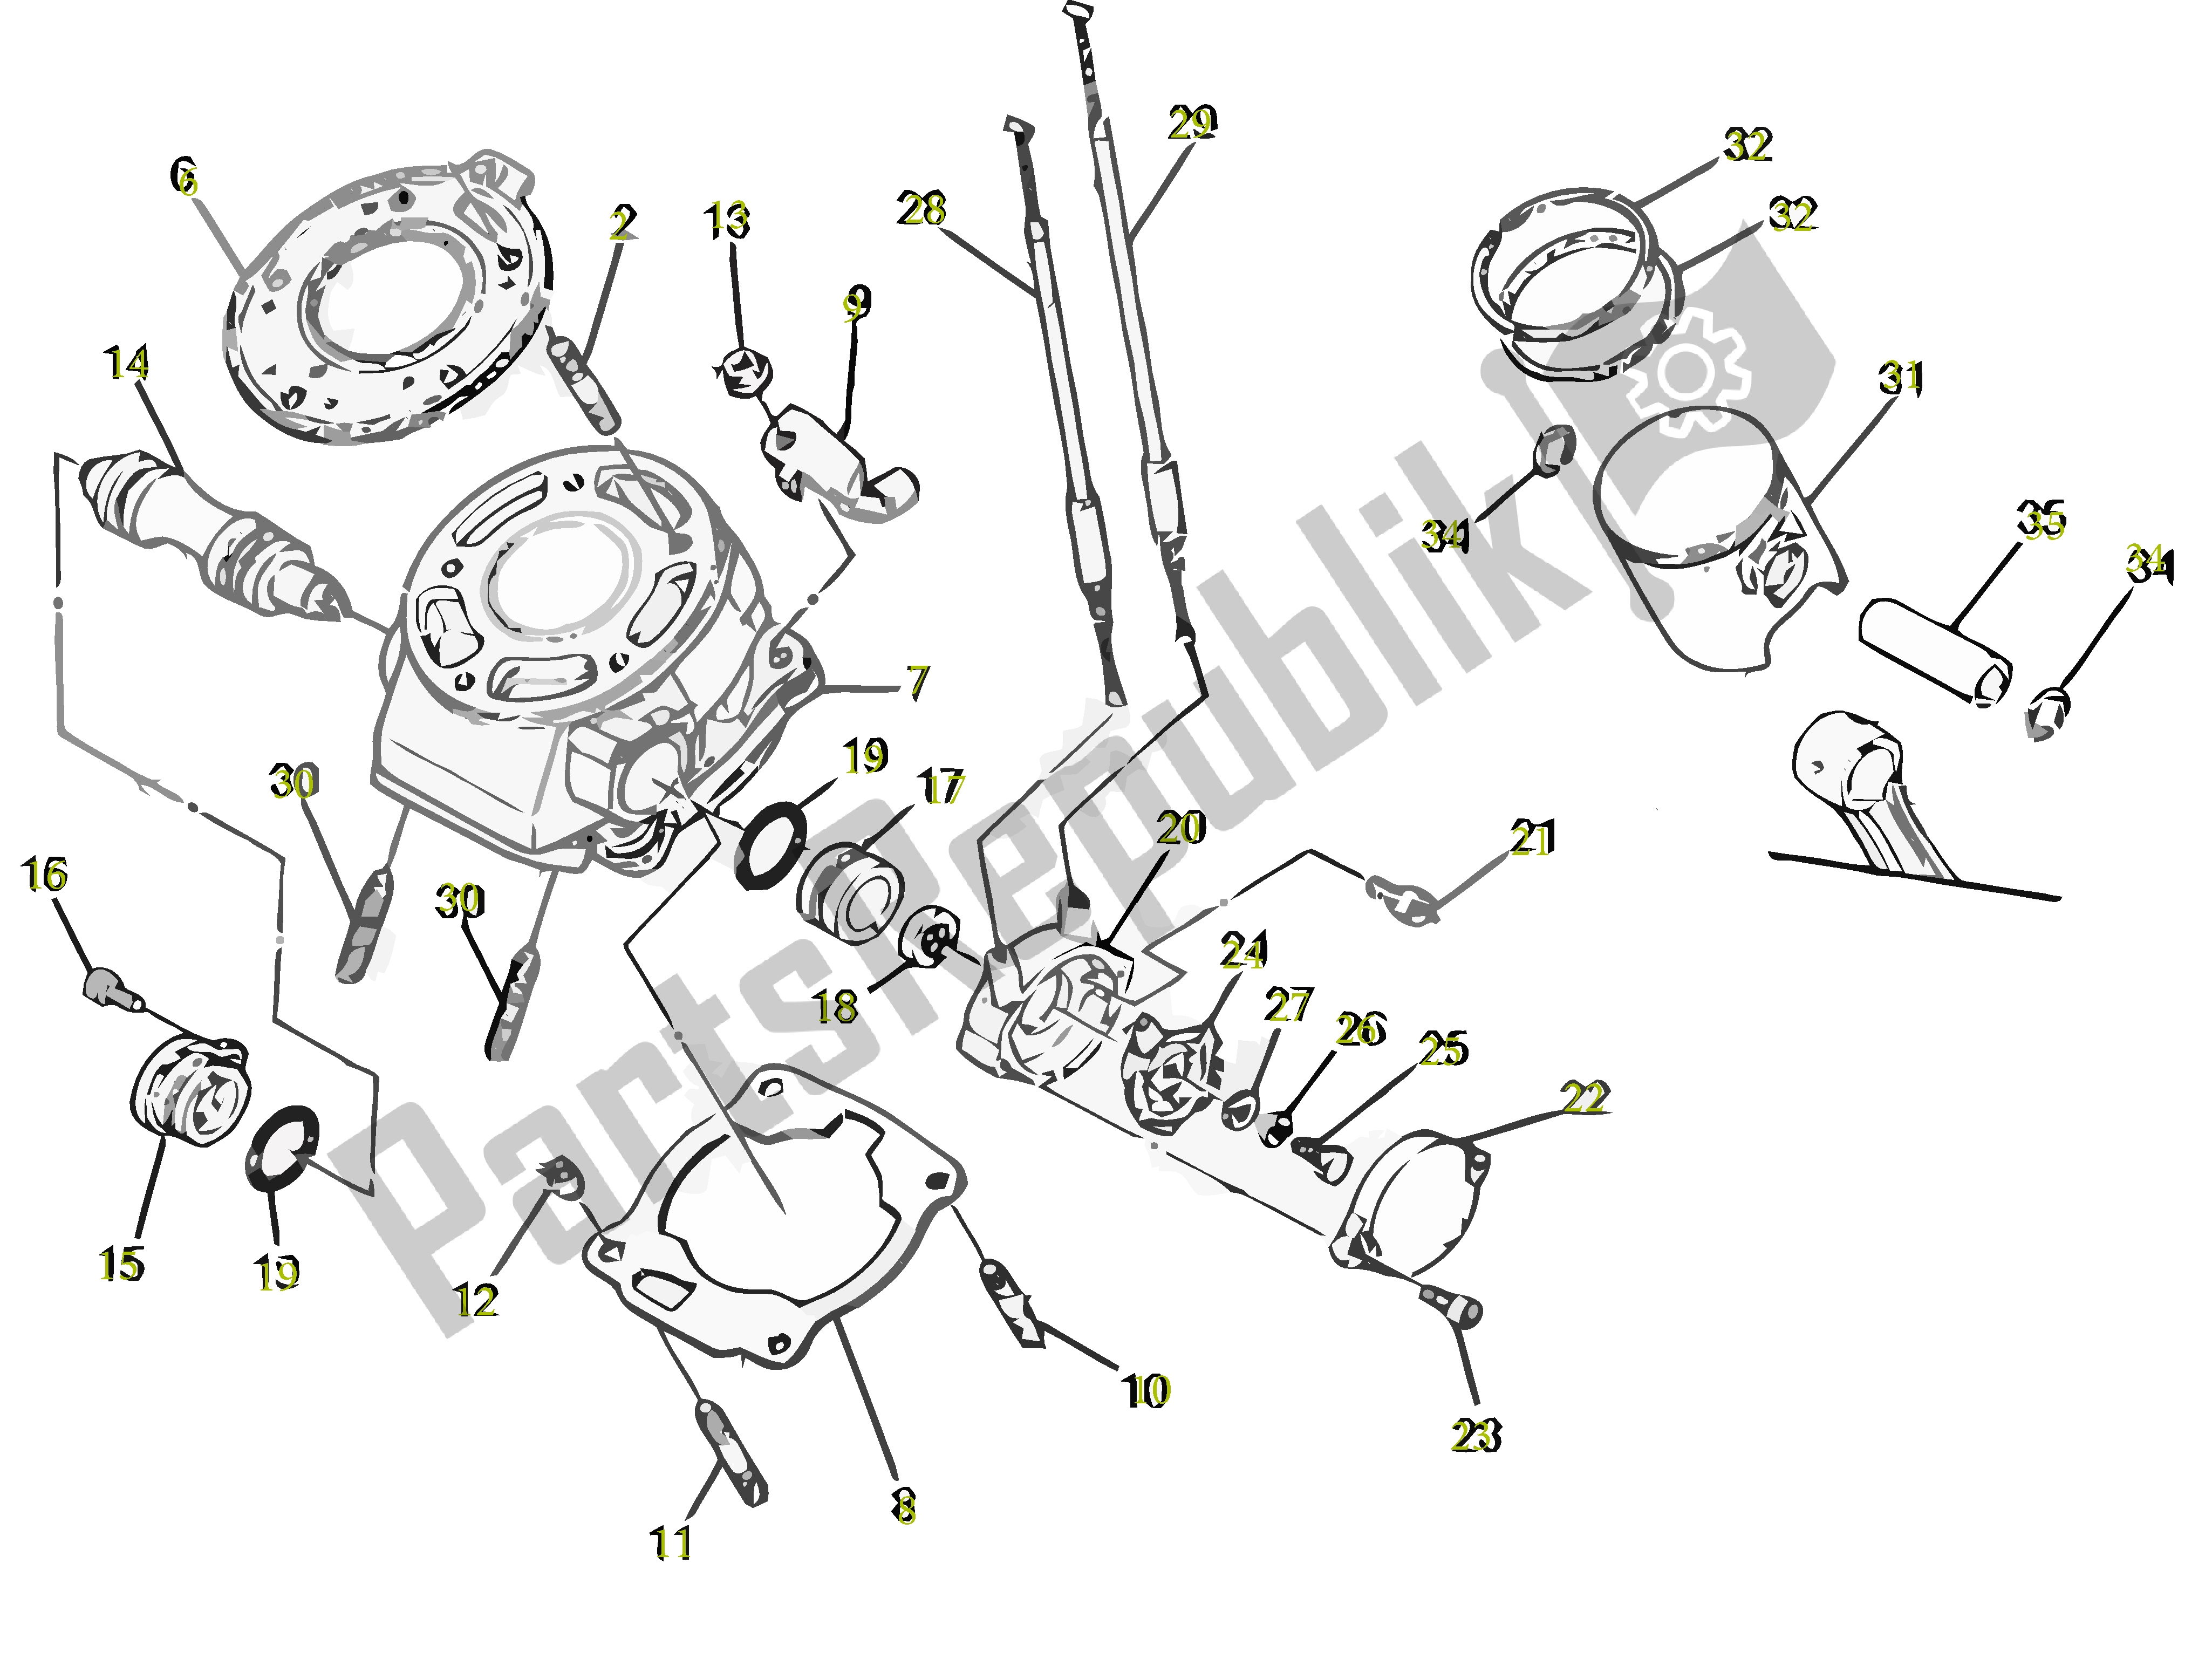 All parts for the Cilinder - Zuigers of the Gilera SC 125 2007 - 2015